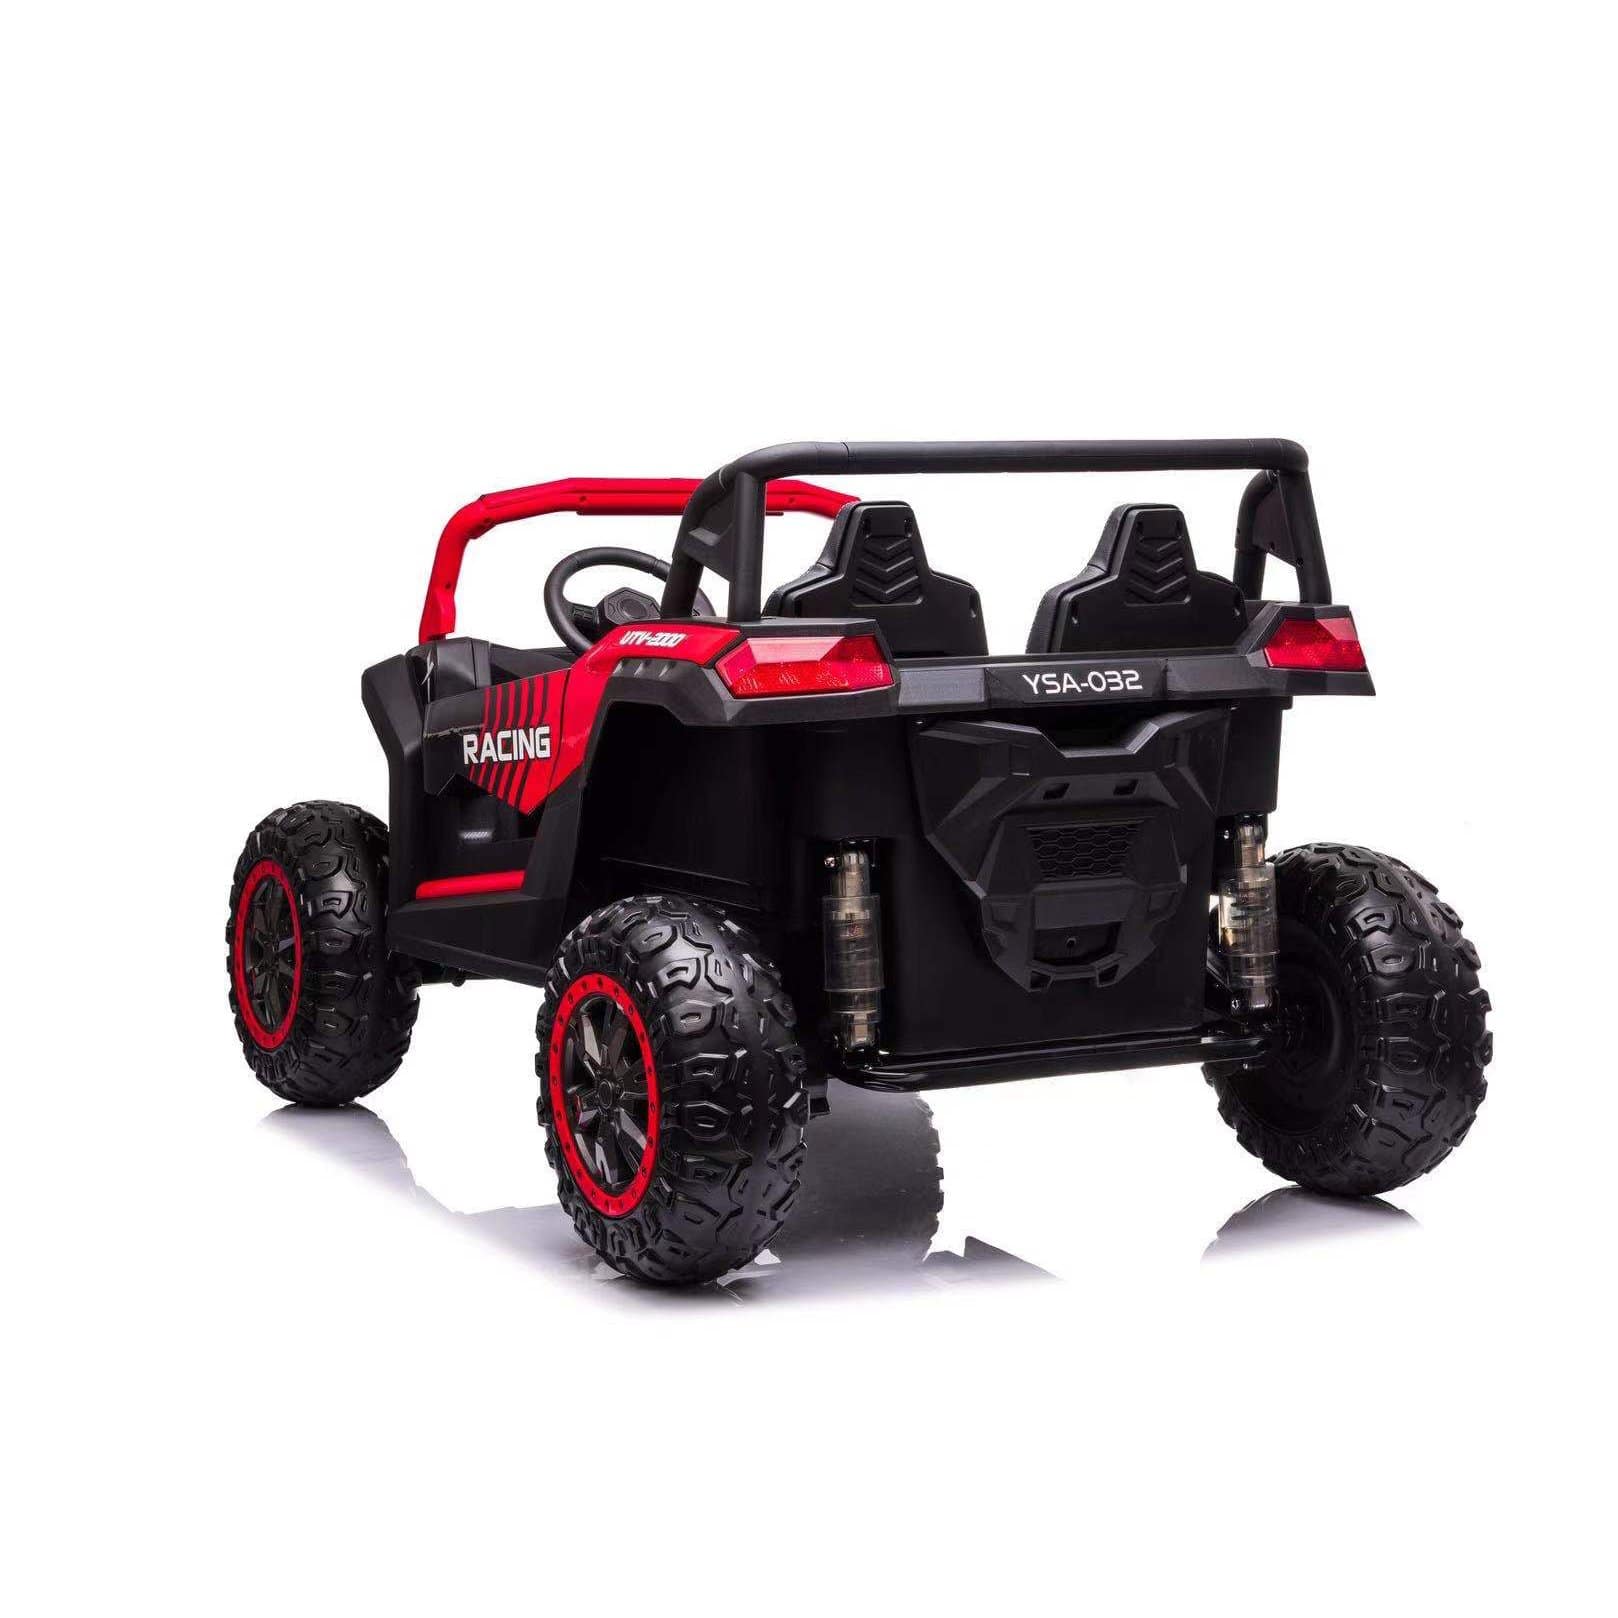 24V 4x4 Freddo Toys Dune Buggy 2 Seater Ride on with Parental Remote Control for 3+ Years (Red)